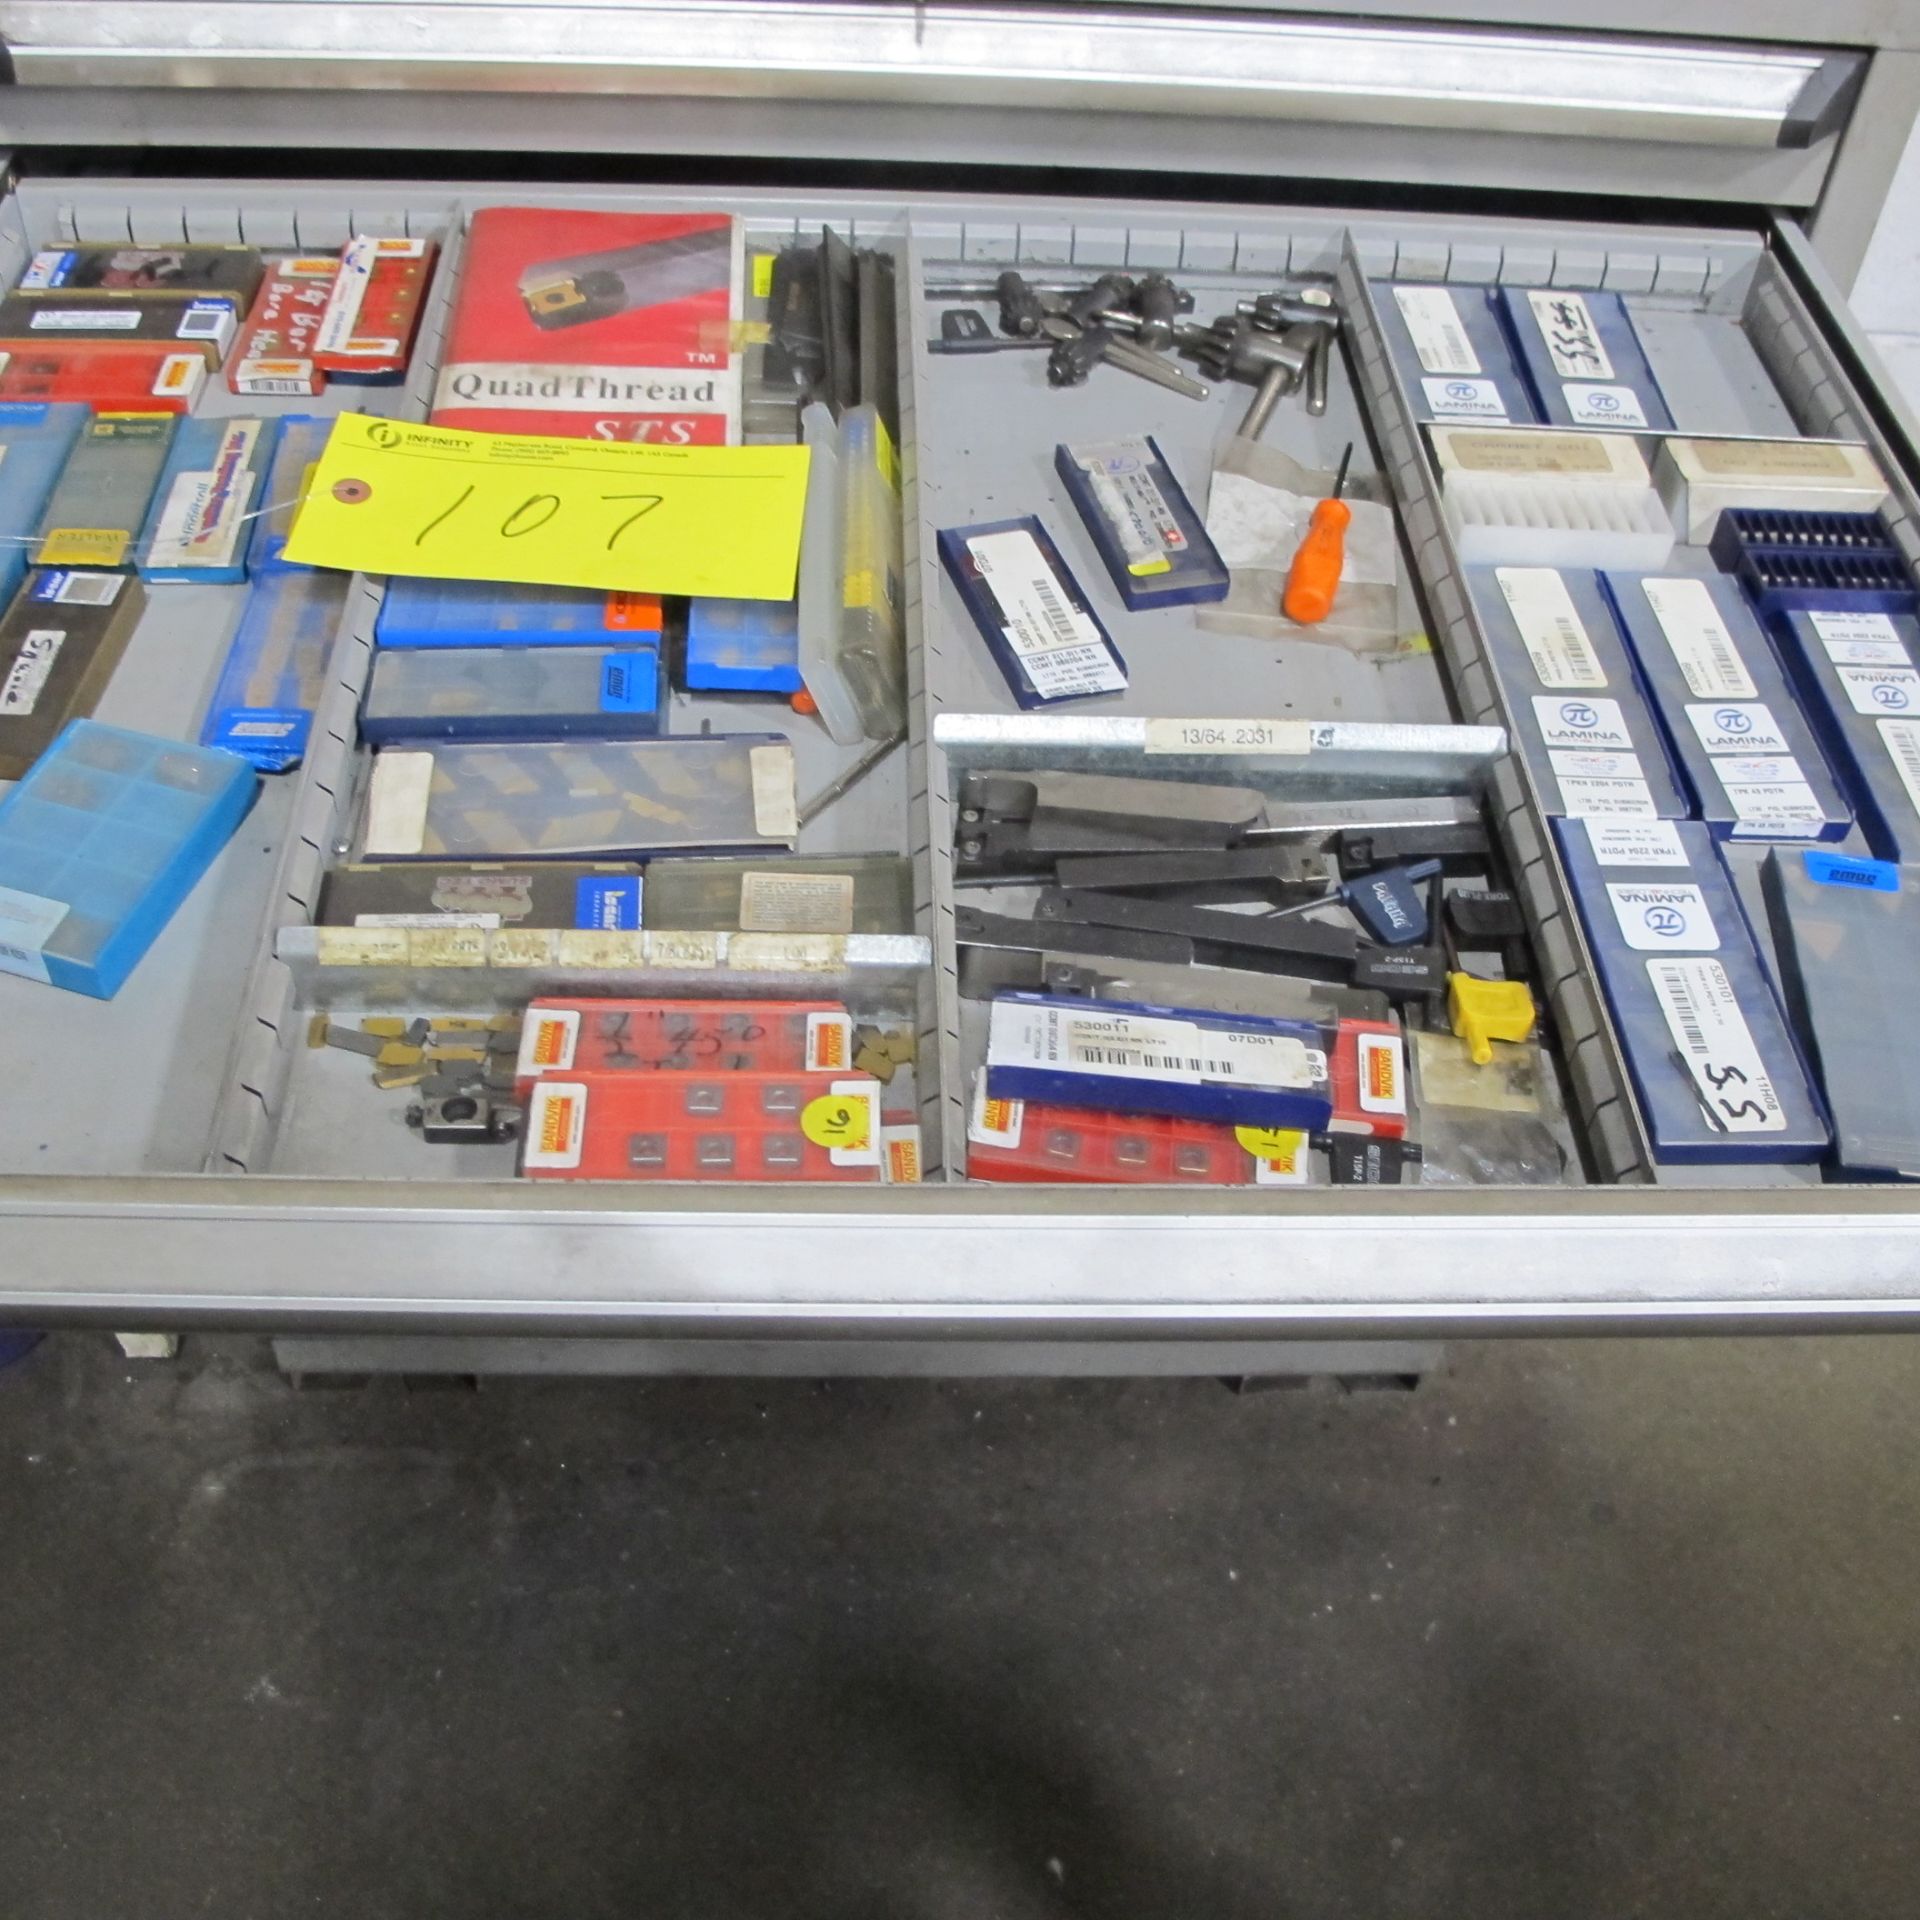 CONTENTS OF 1 DRAWER OF ROUSSEAU CABINET (CARBIDE CUTTING BIT KITS, ETC)